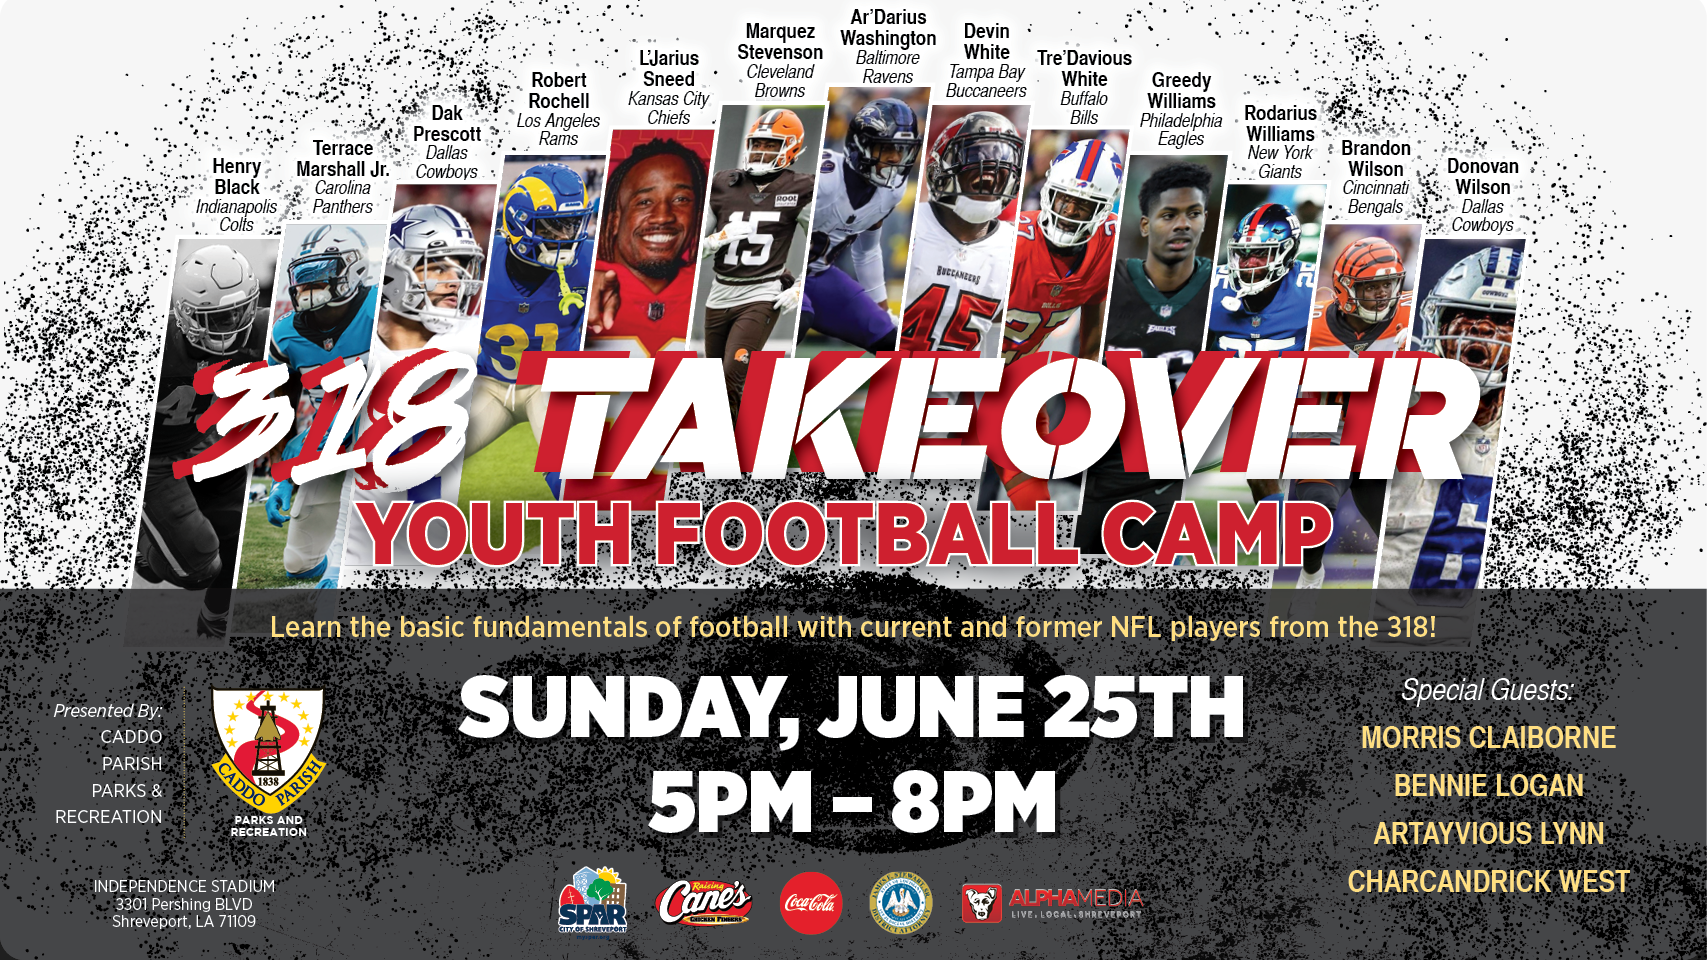 Featured image for “318 NFL STARS RETURN HOME TO HOST YOUTH FOOTBALL CAMP”